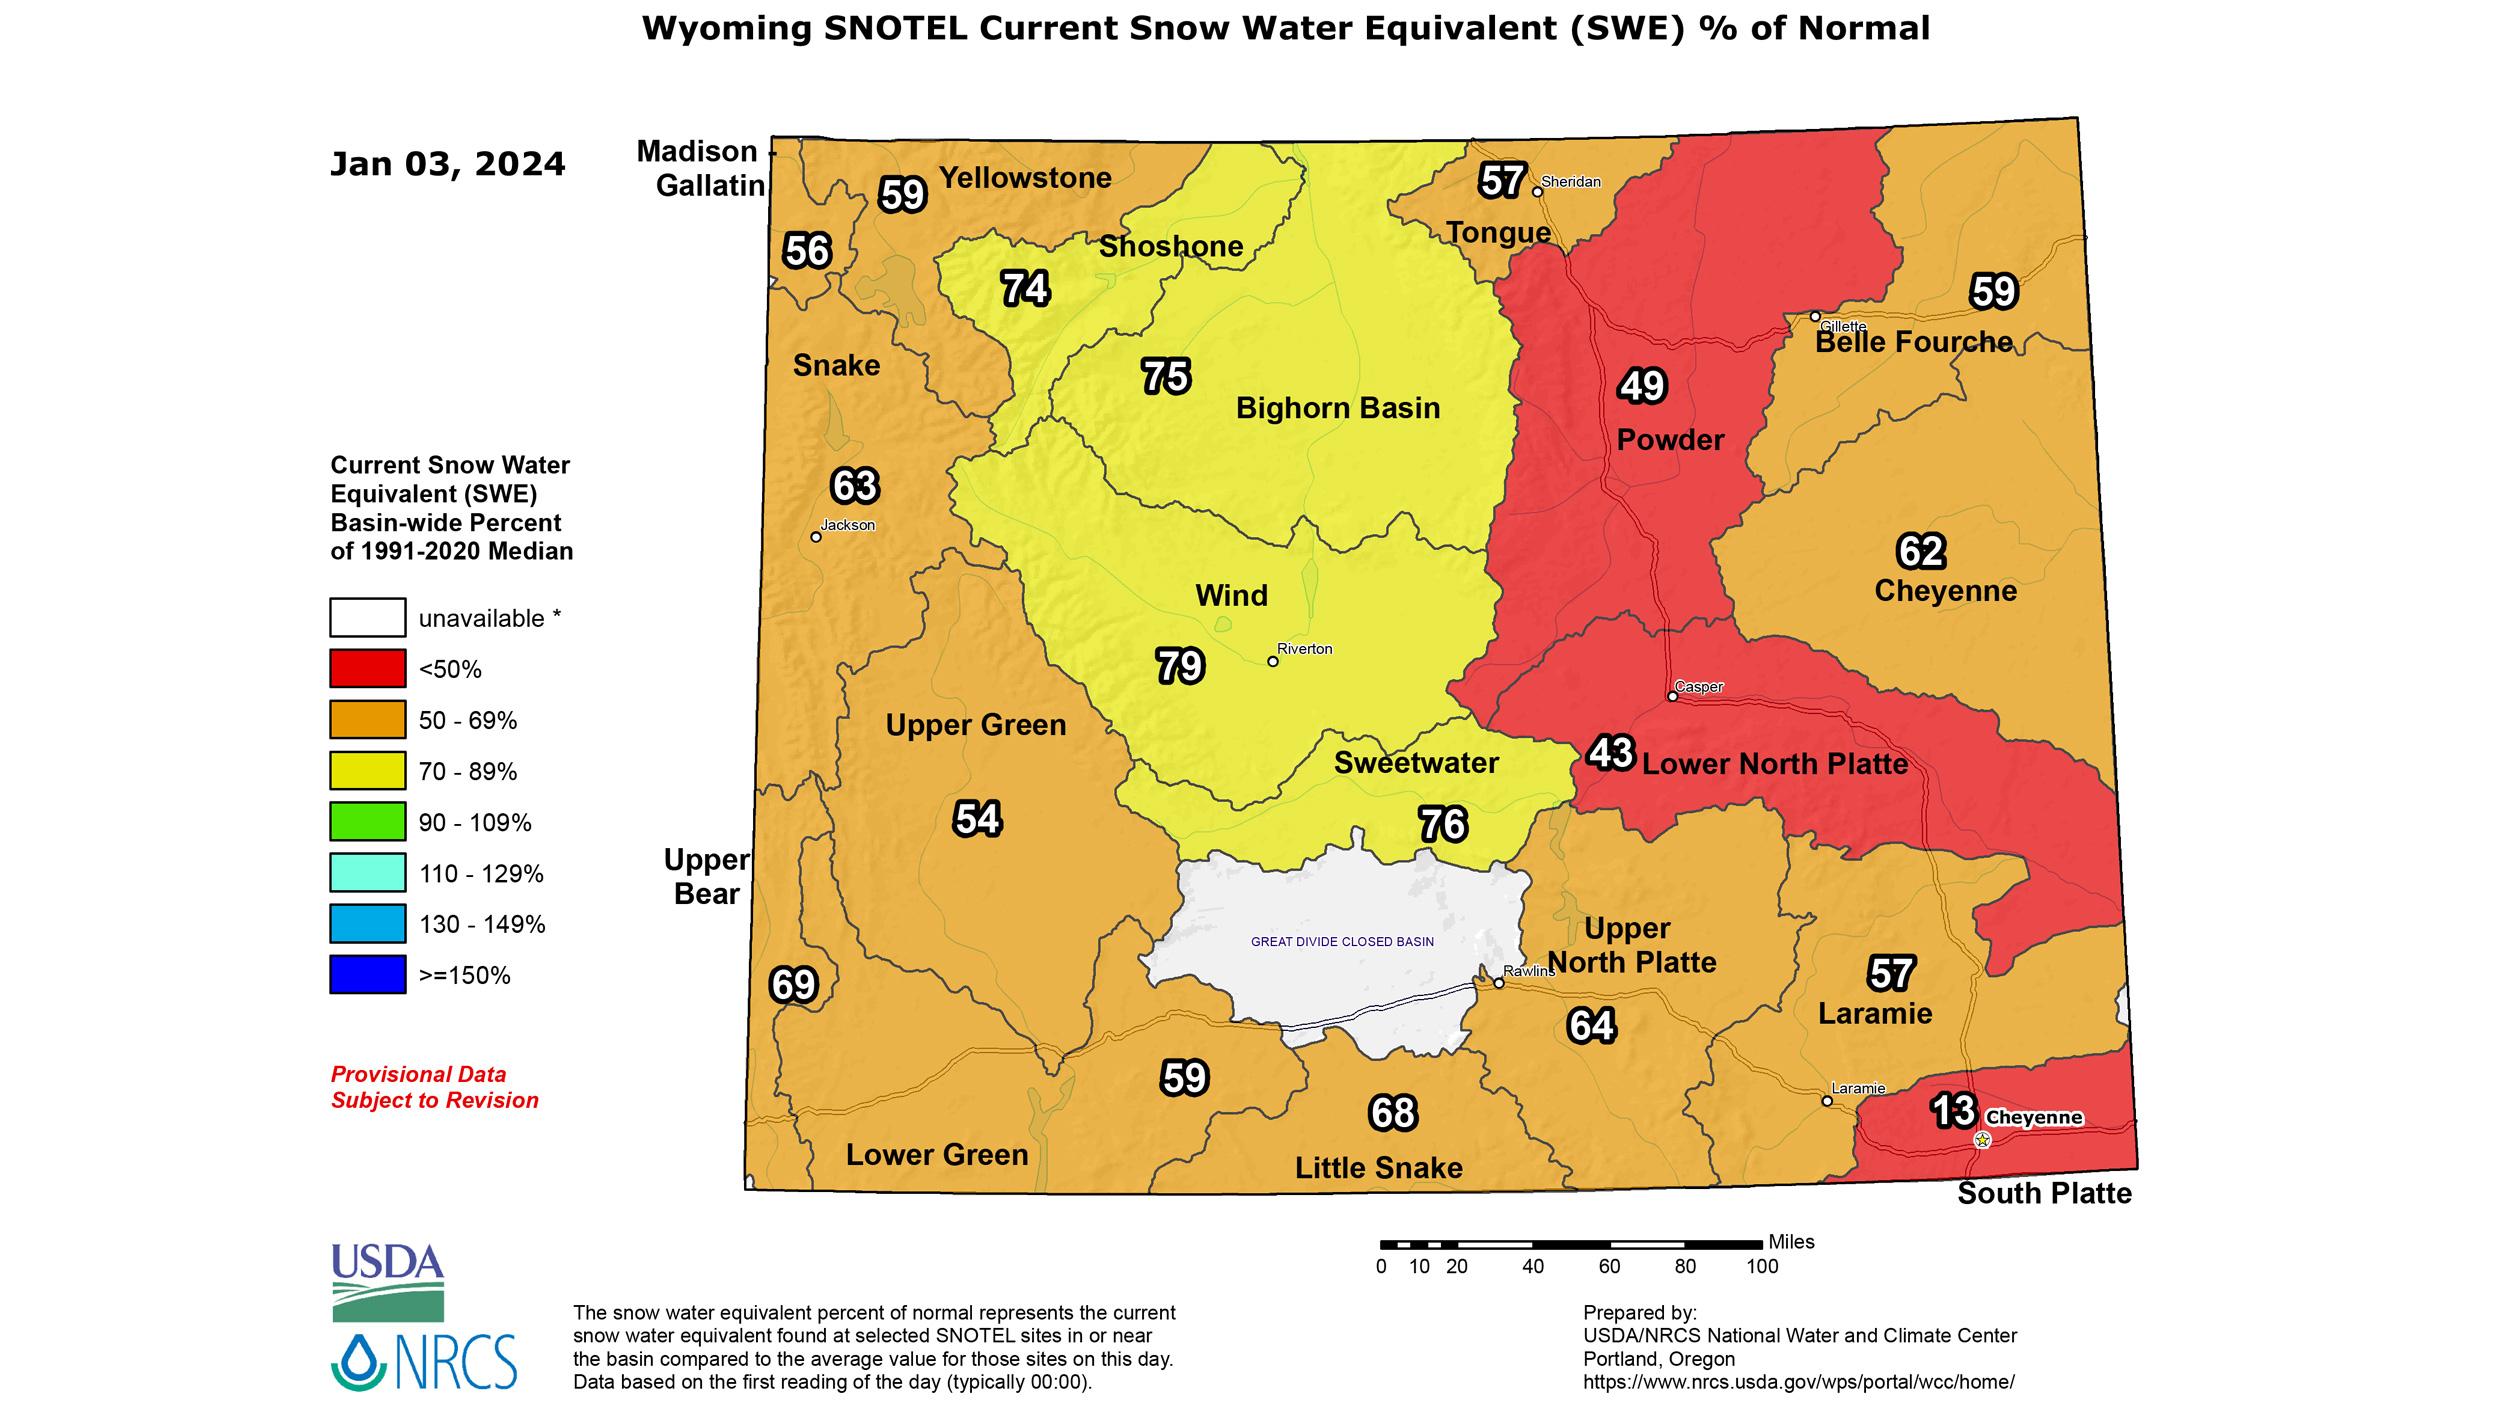 January 2024 Wyoming snow water equivalent percent of normal